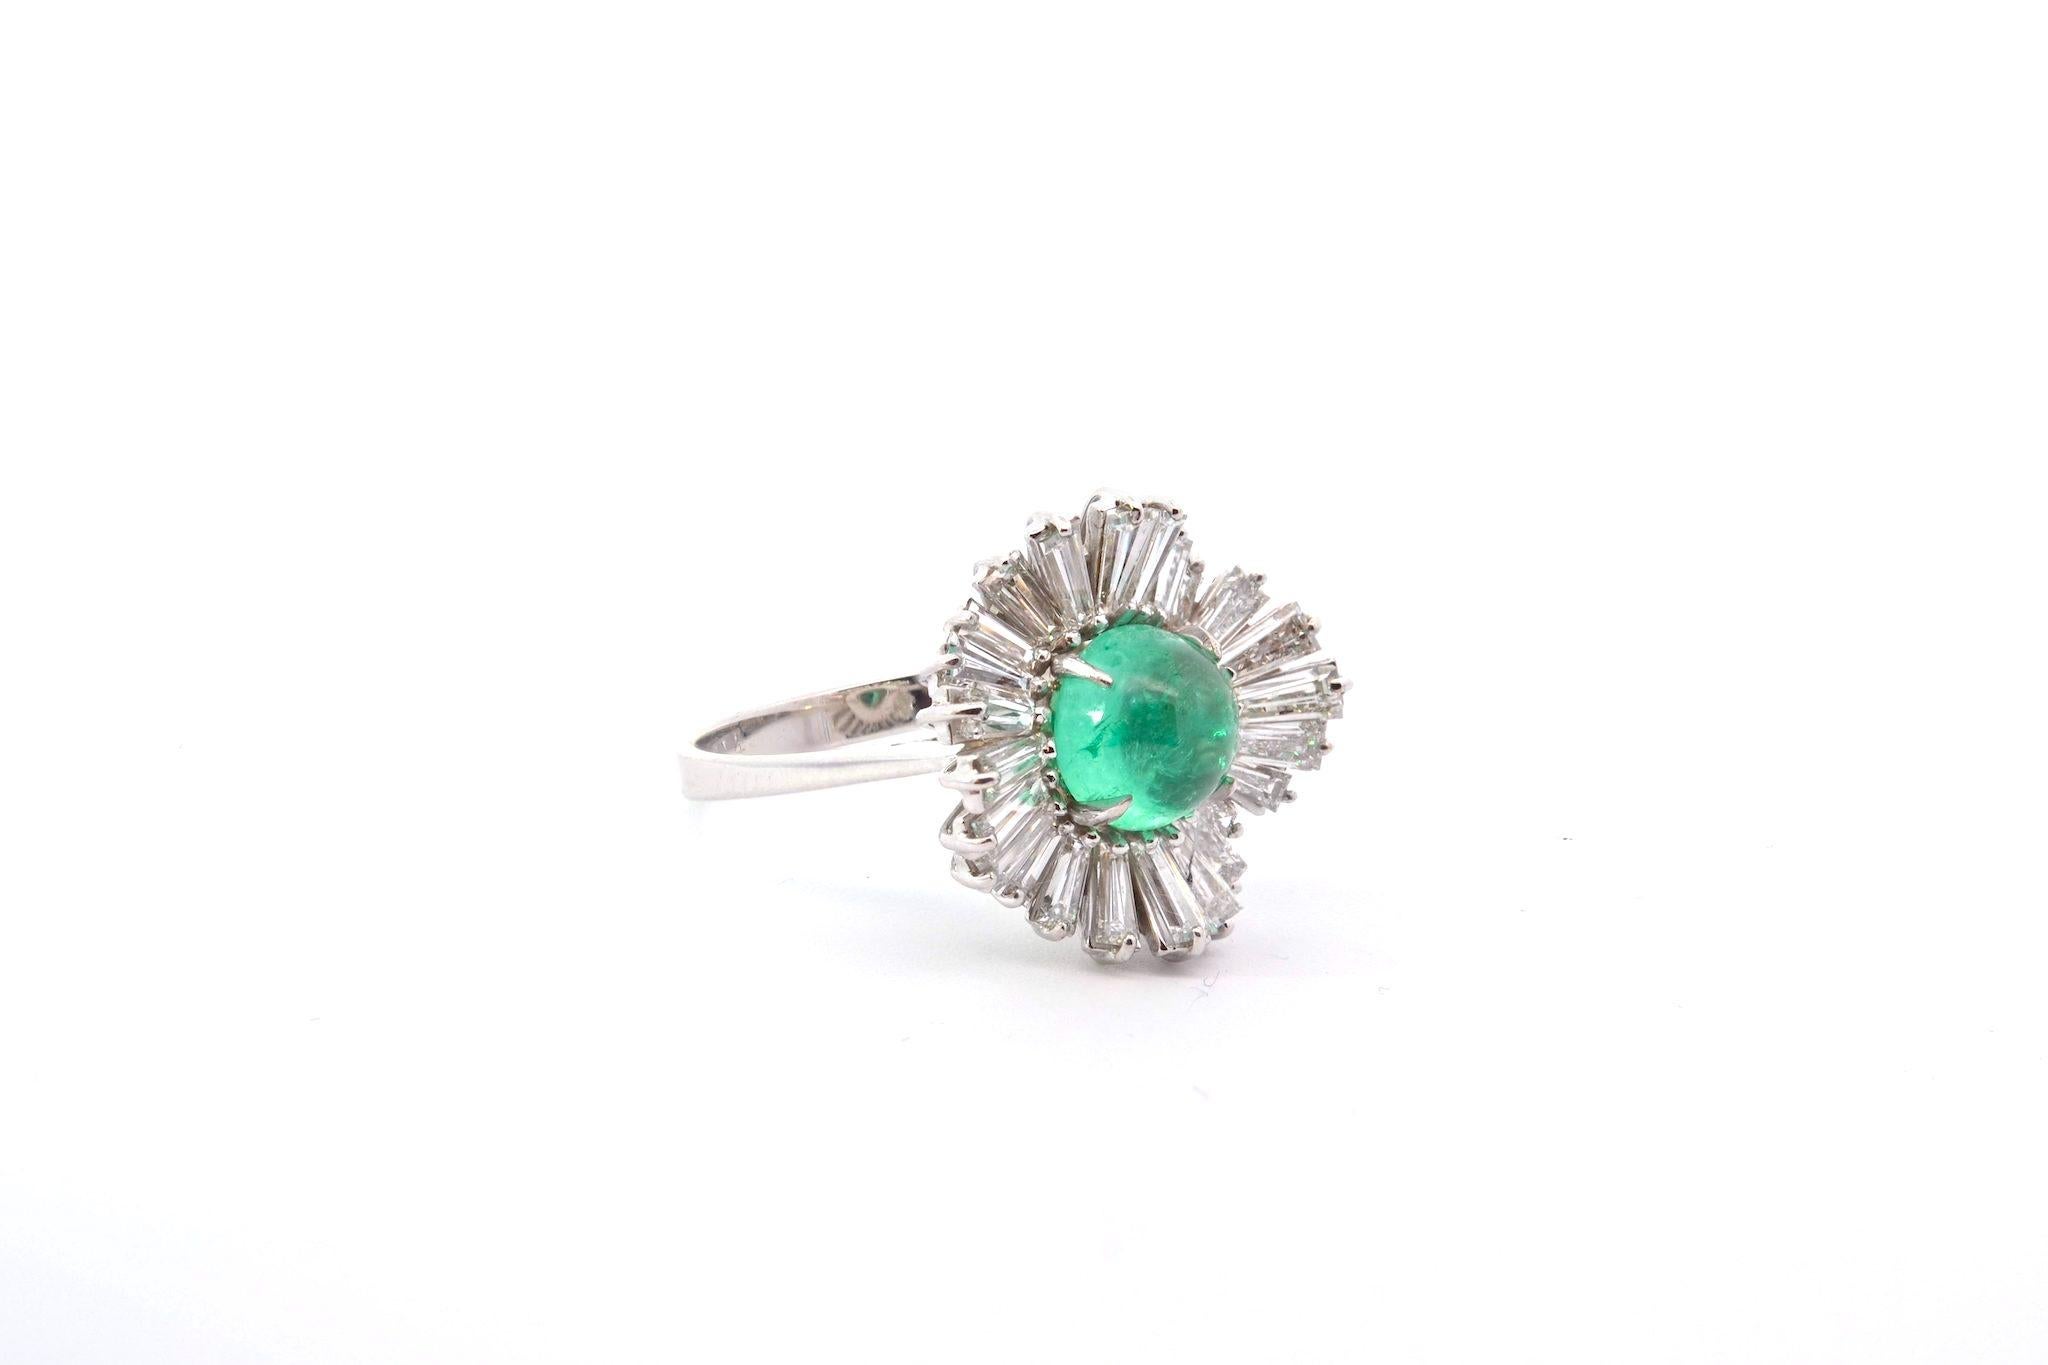 Cabochon 1.5 carats cabochon emerald and diamonds ring For Sale